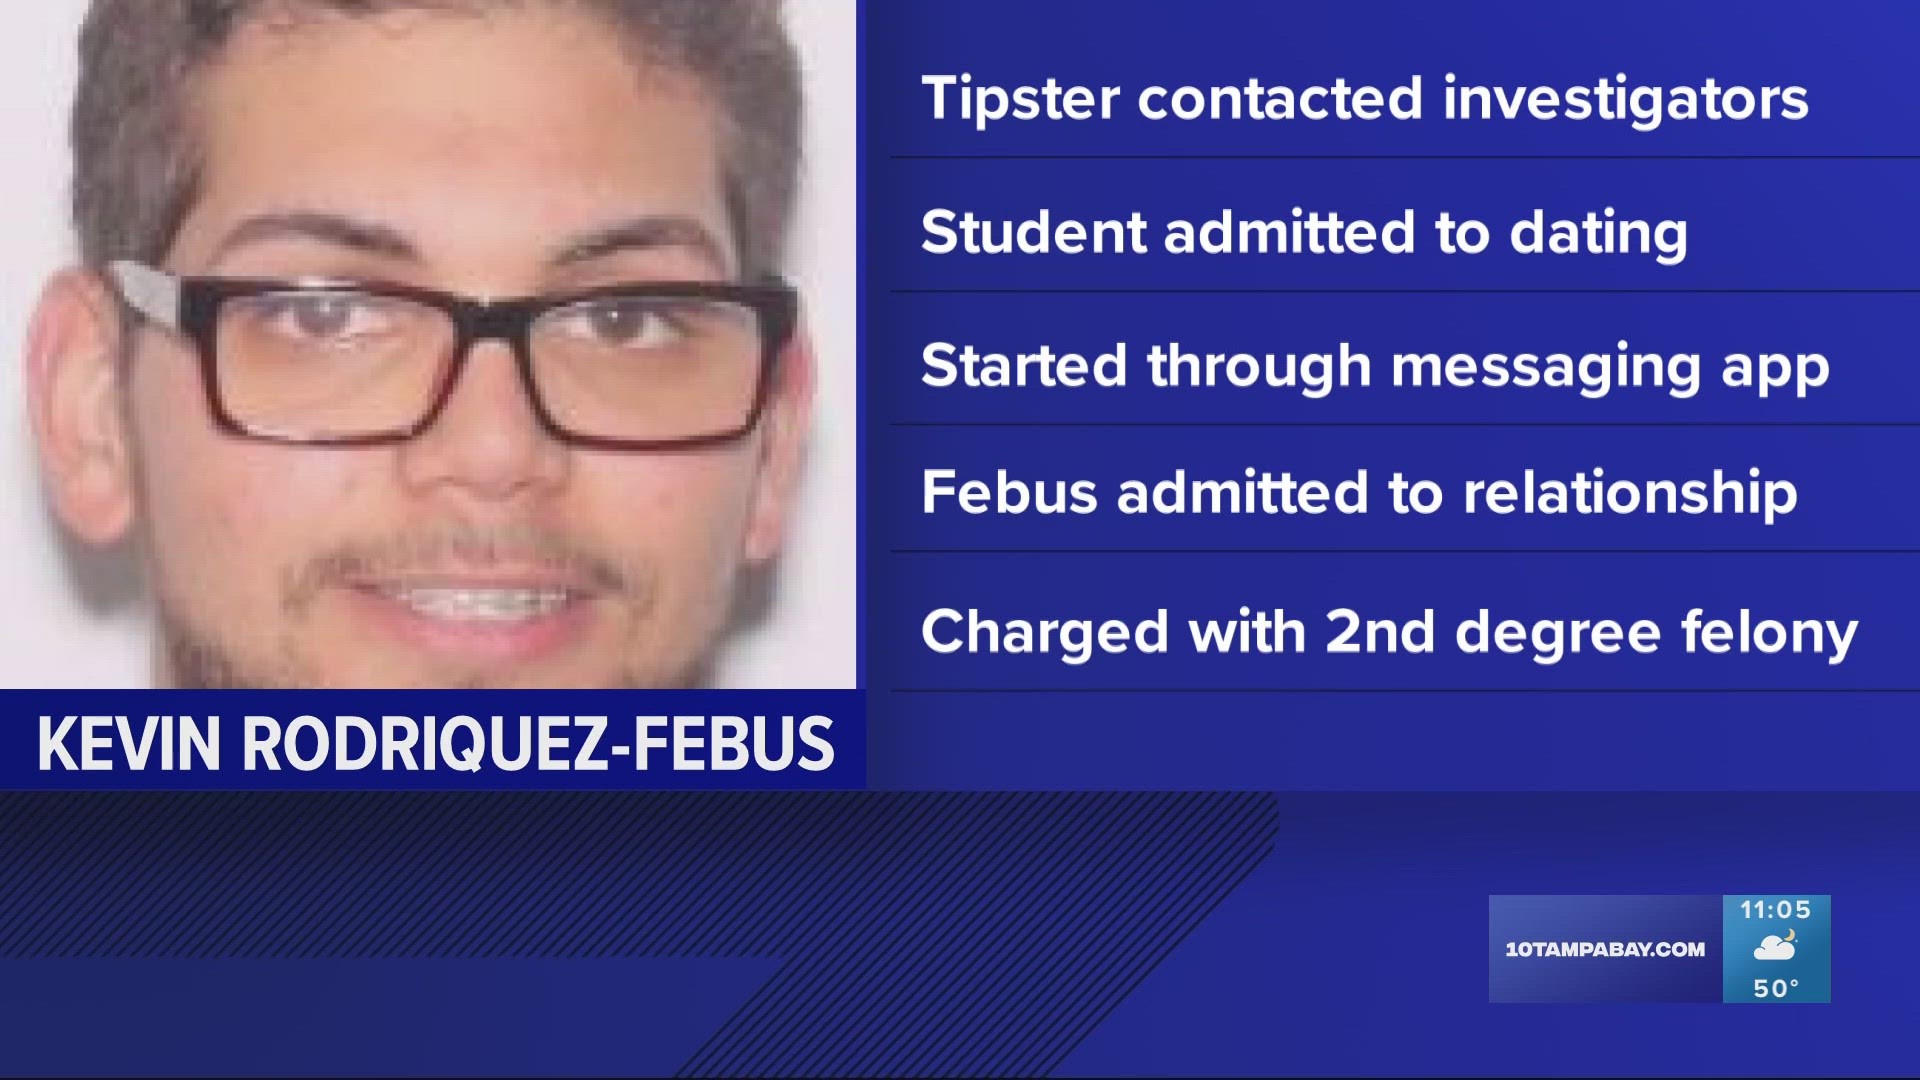 Police said the 23-year-old teacher "admitted to several acts of inappropriate behavior."